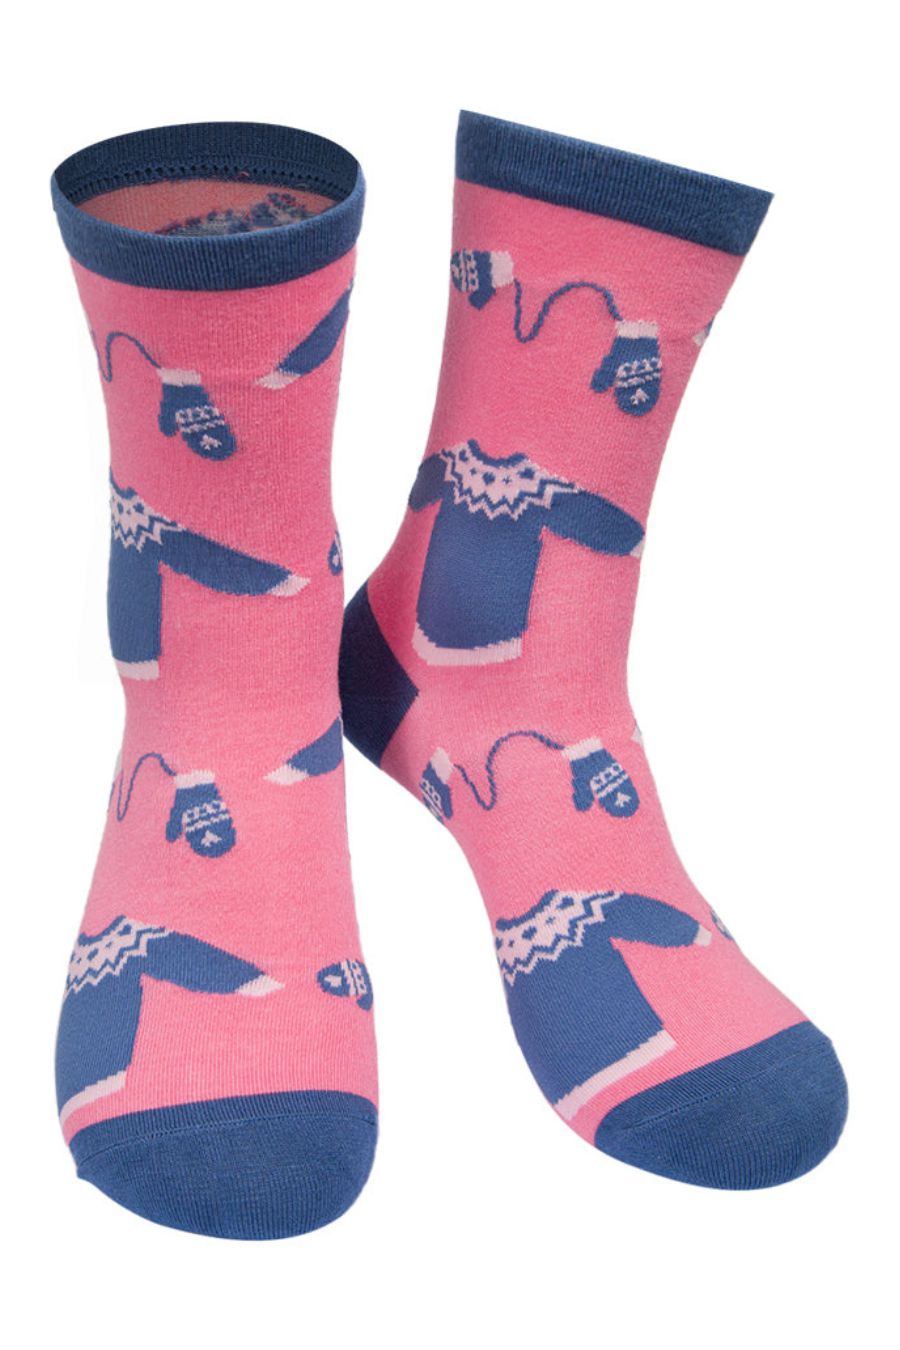 pink and blue bamboo socks with a pattern of xmas jumpers and winter gloves